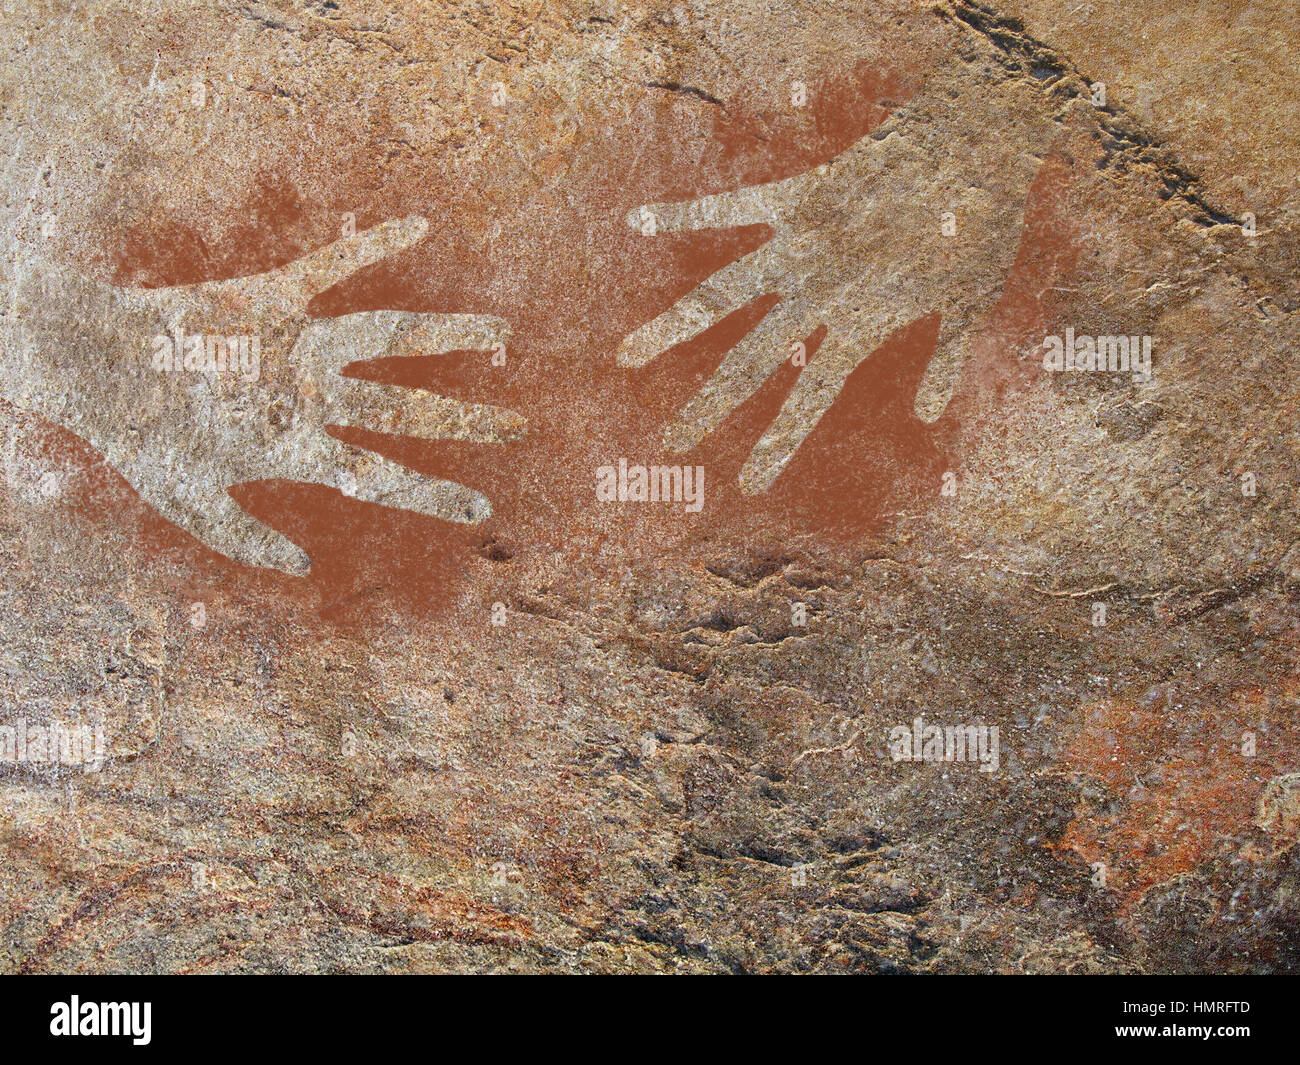 Two hand print outlines in the style of prehistoric rock art, ochre. Stock Photo